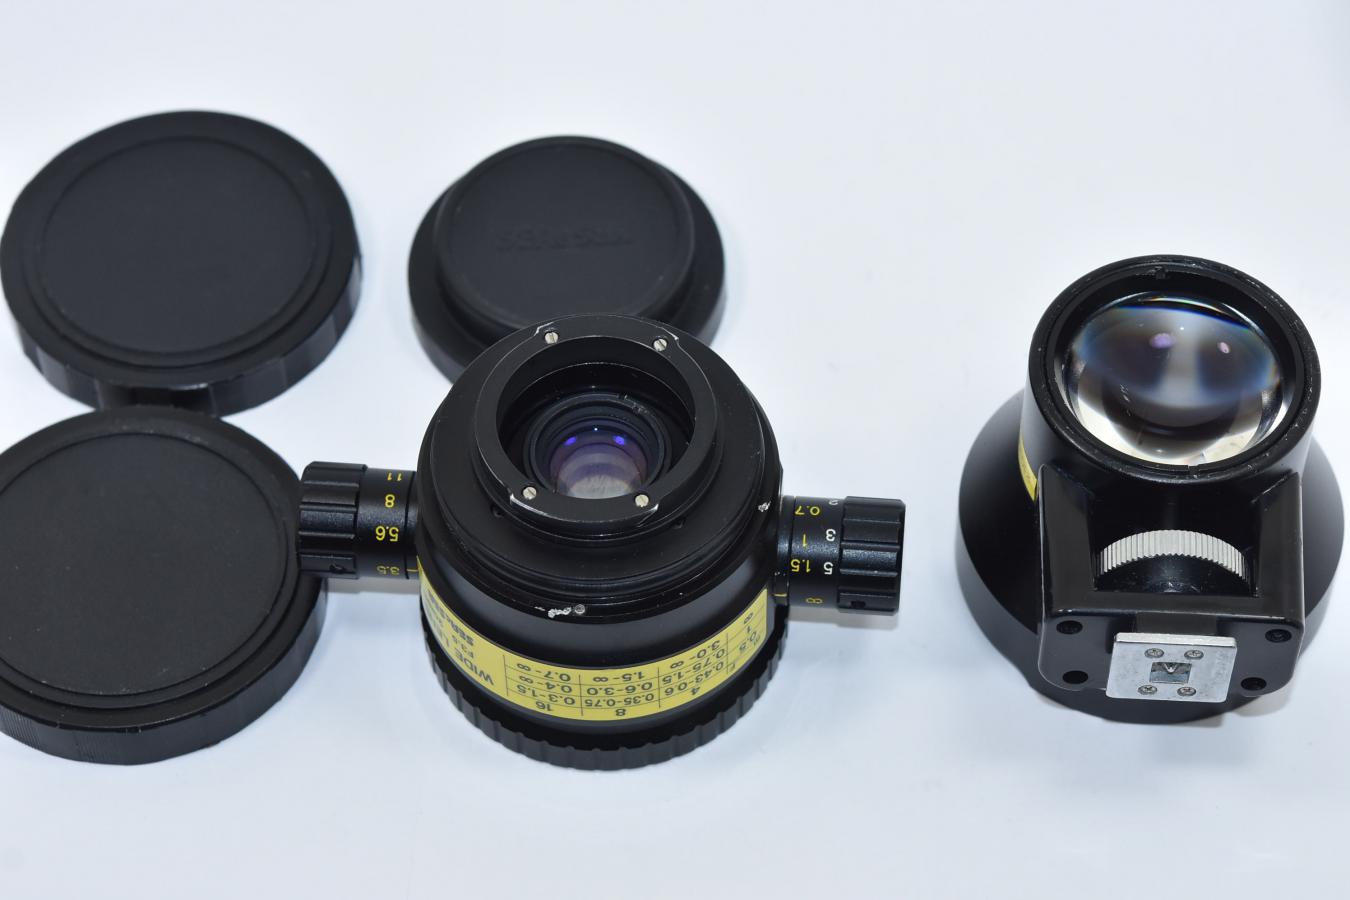 Details about   【Near MINT】Sea&Sea Wide Lens 20mm f/3.5 Finder 15/20/35 for Nikonos from Japan 